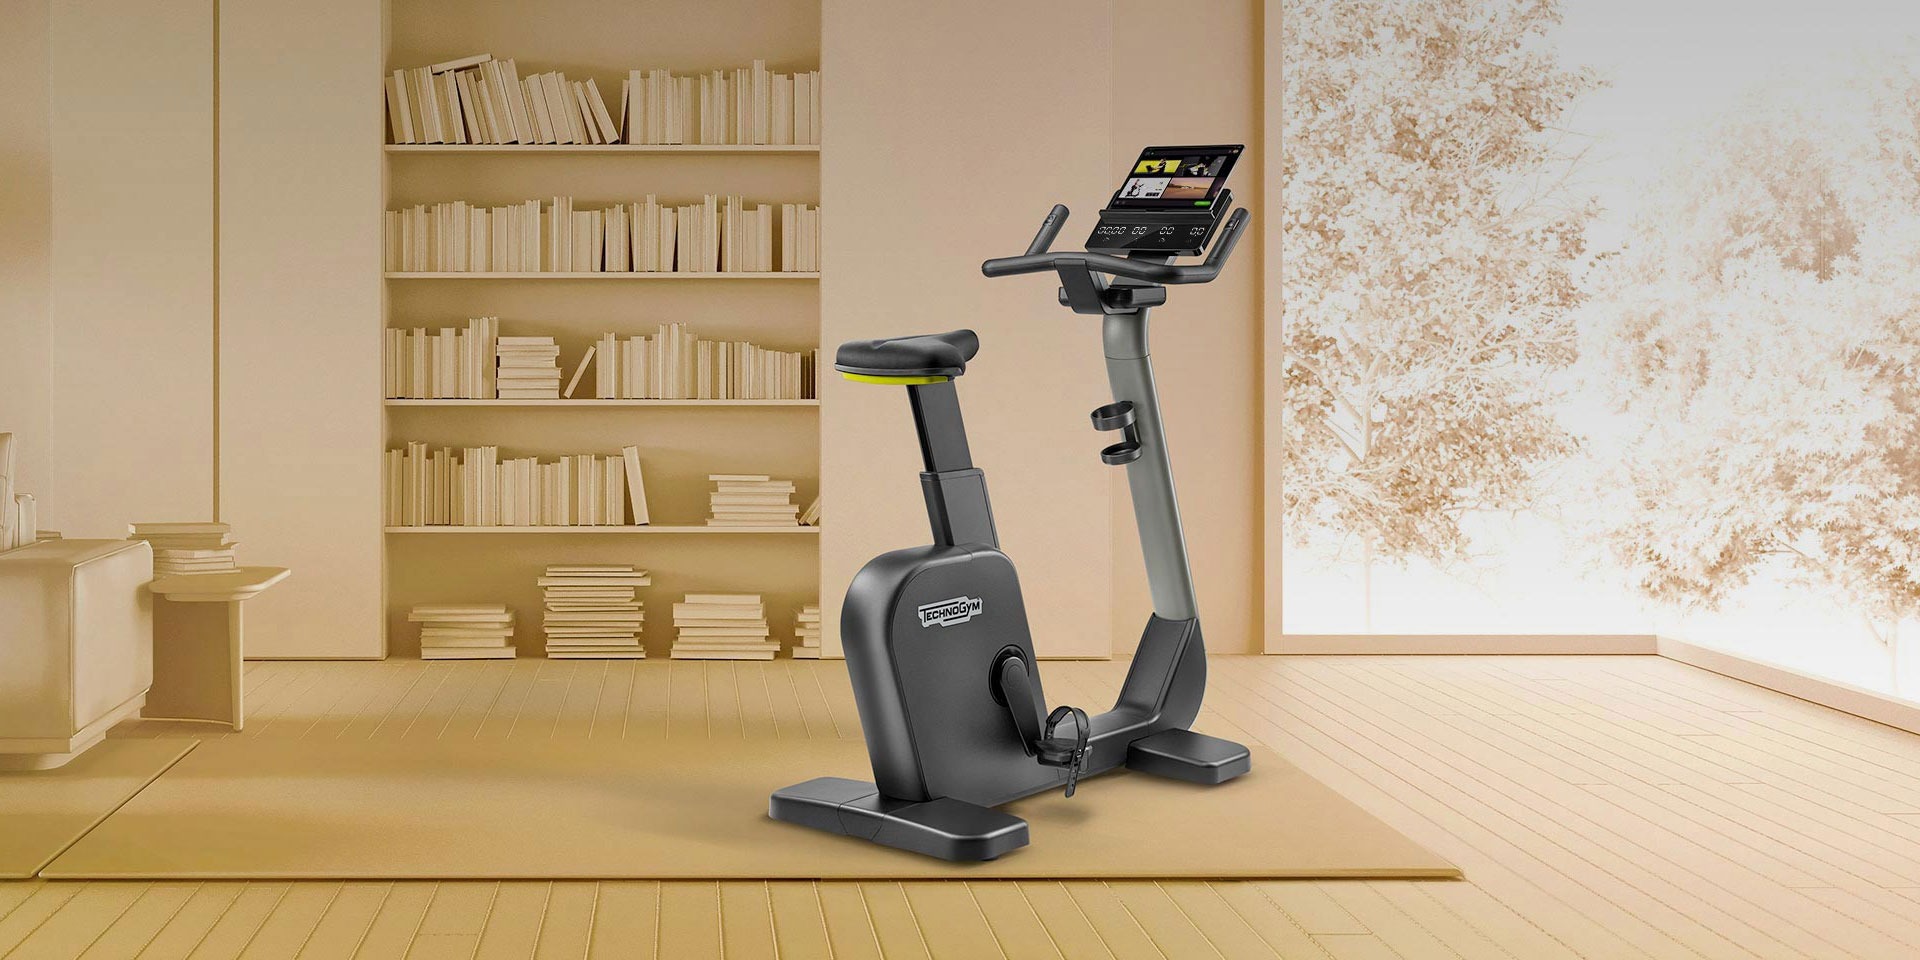 technogym-cycle-suits-any-home-environment.jpg